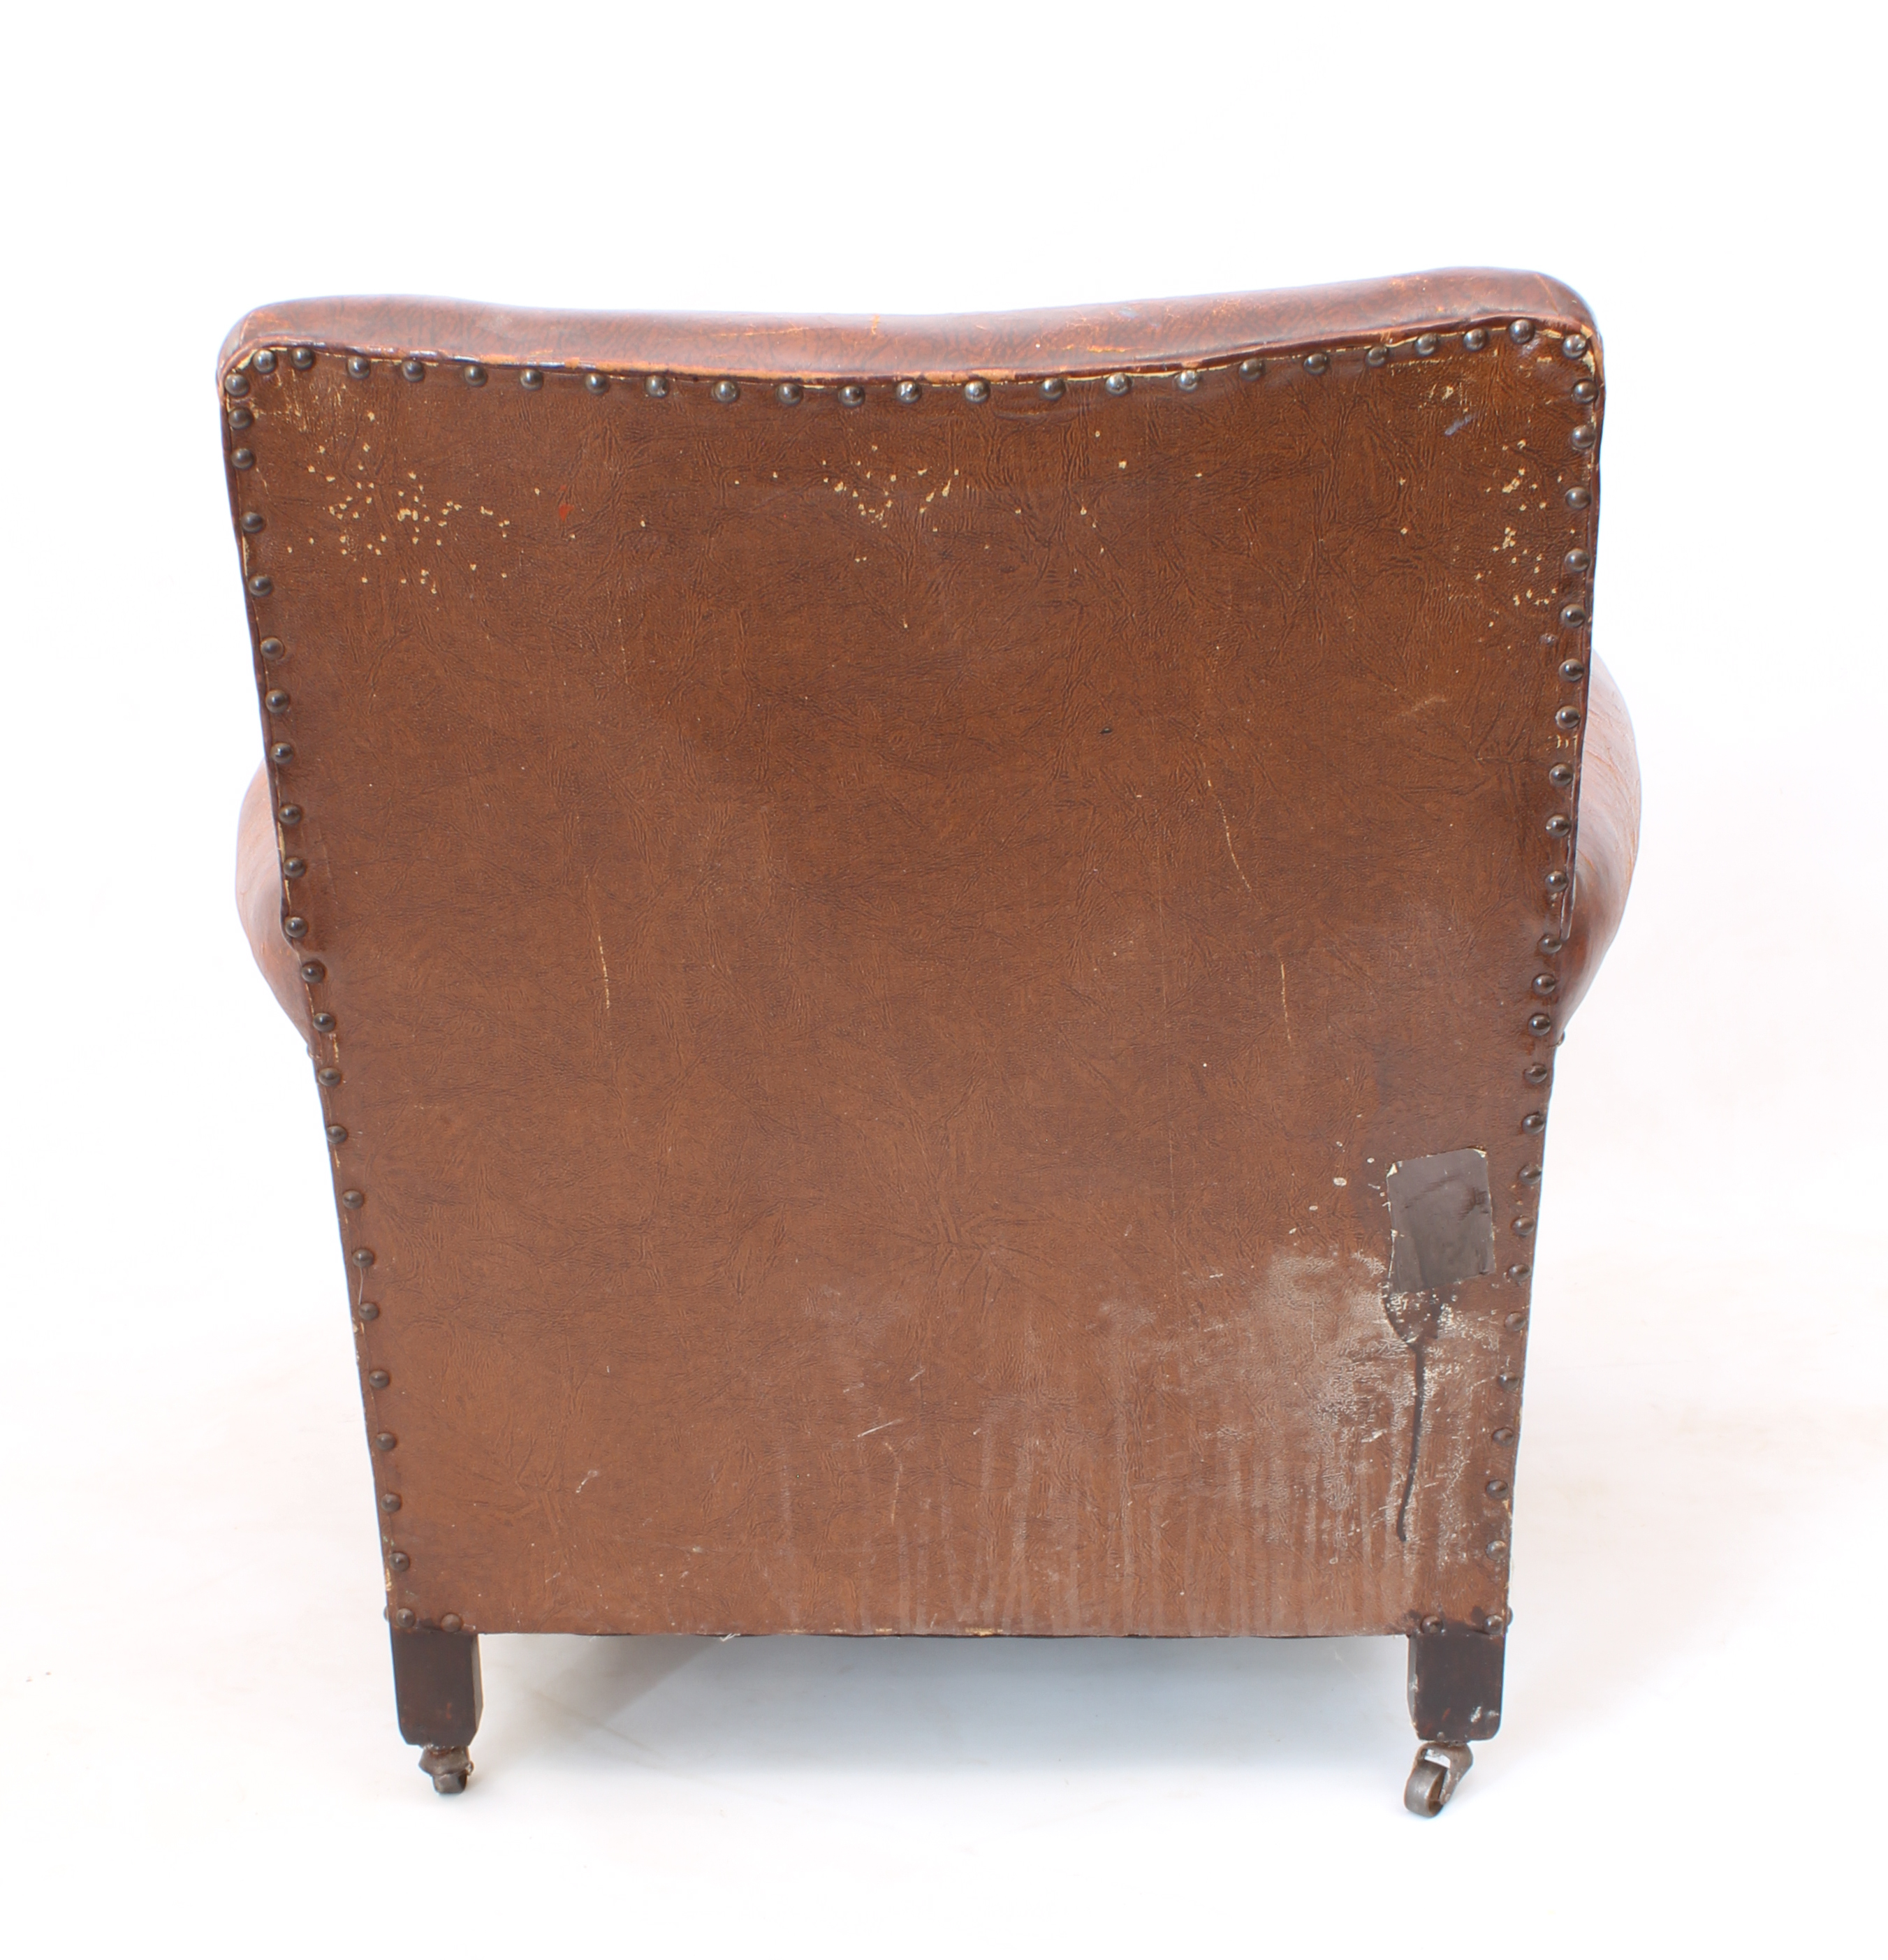 An Art Deco leather club chair - 1920s-30s, in tan studded leather with rexine sides and loose - Image 3 of 4